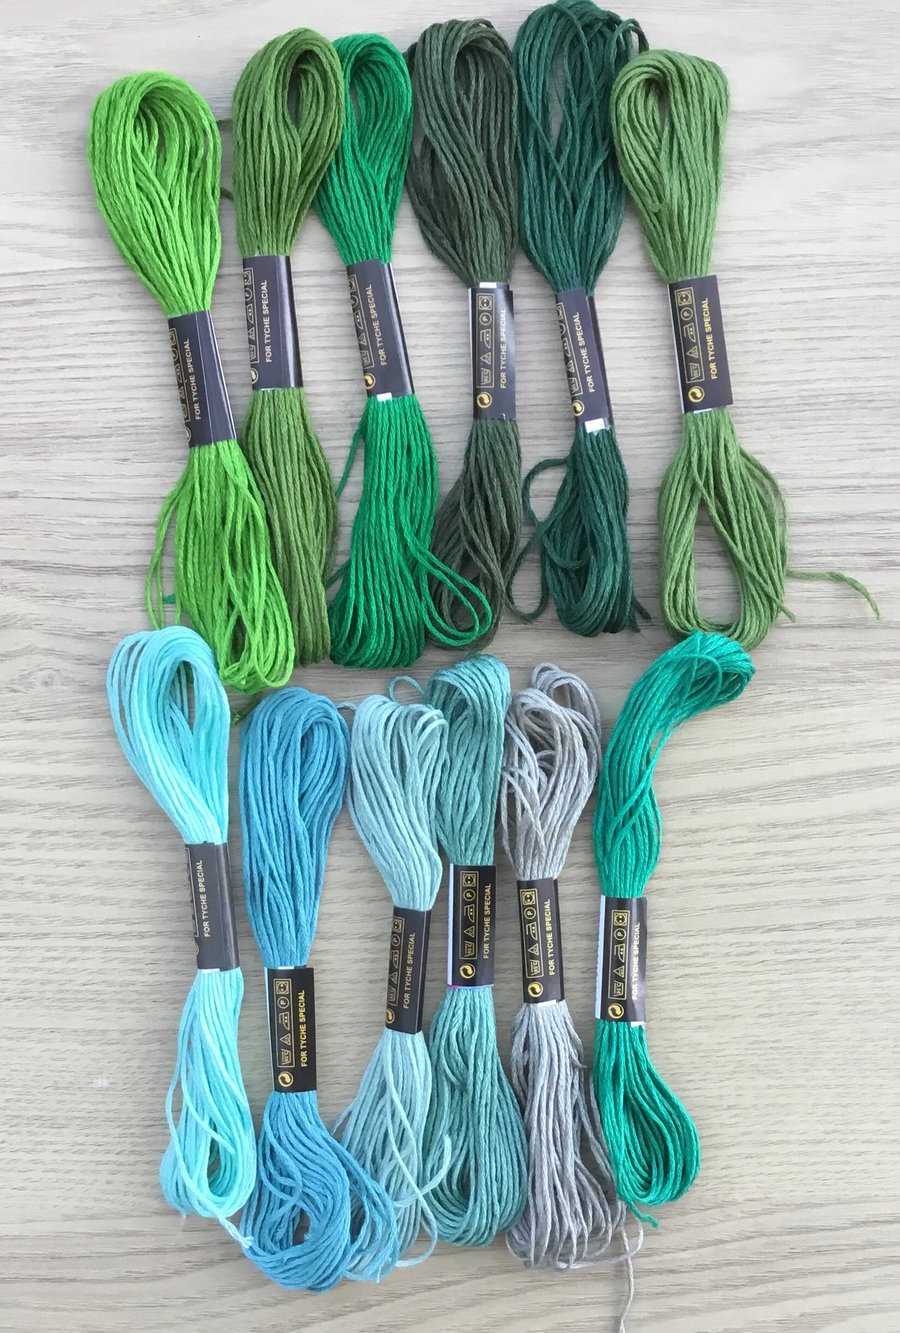 Green Embroidery Bundle!! 12 Skeins of Various Green Tones Embroidery Threads.